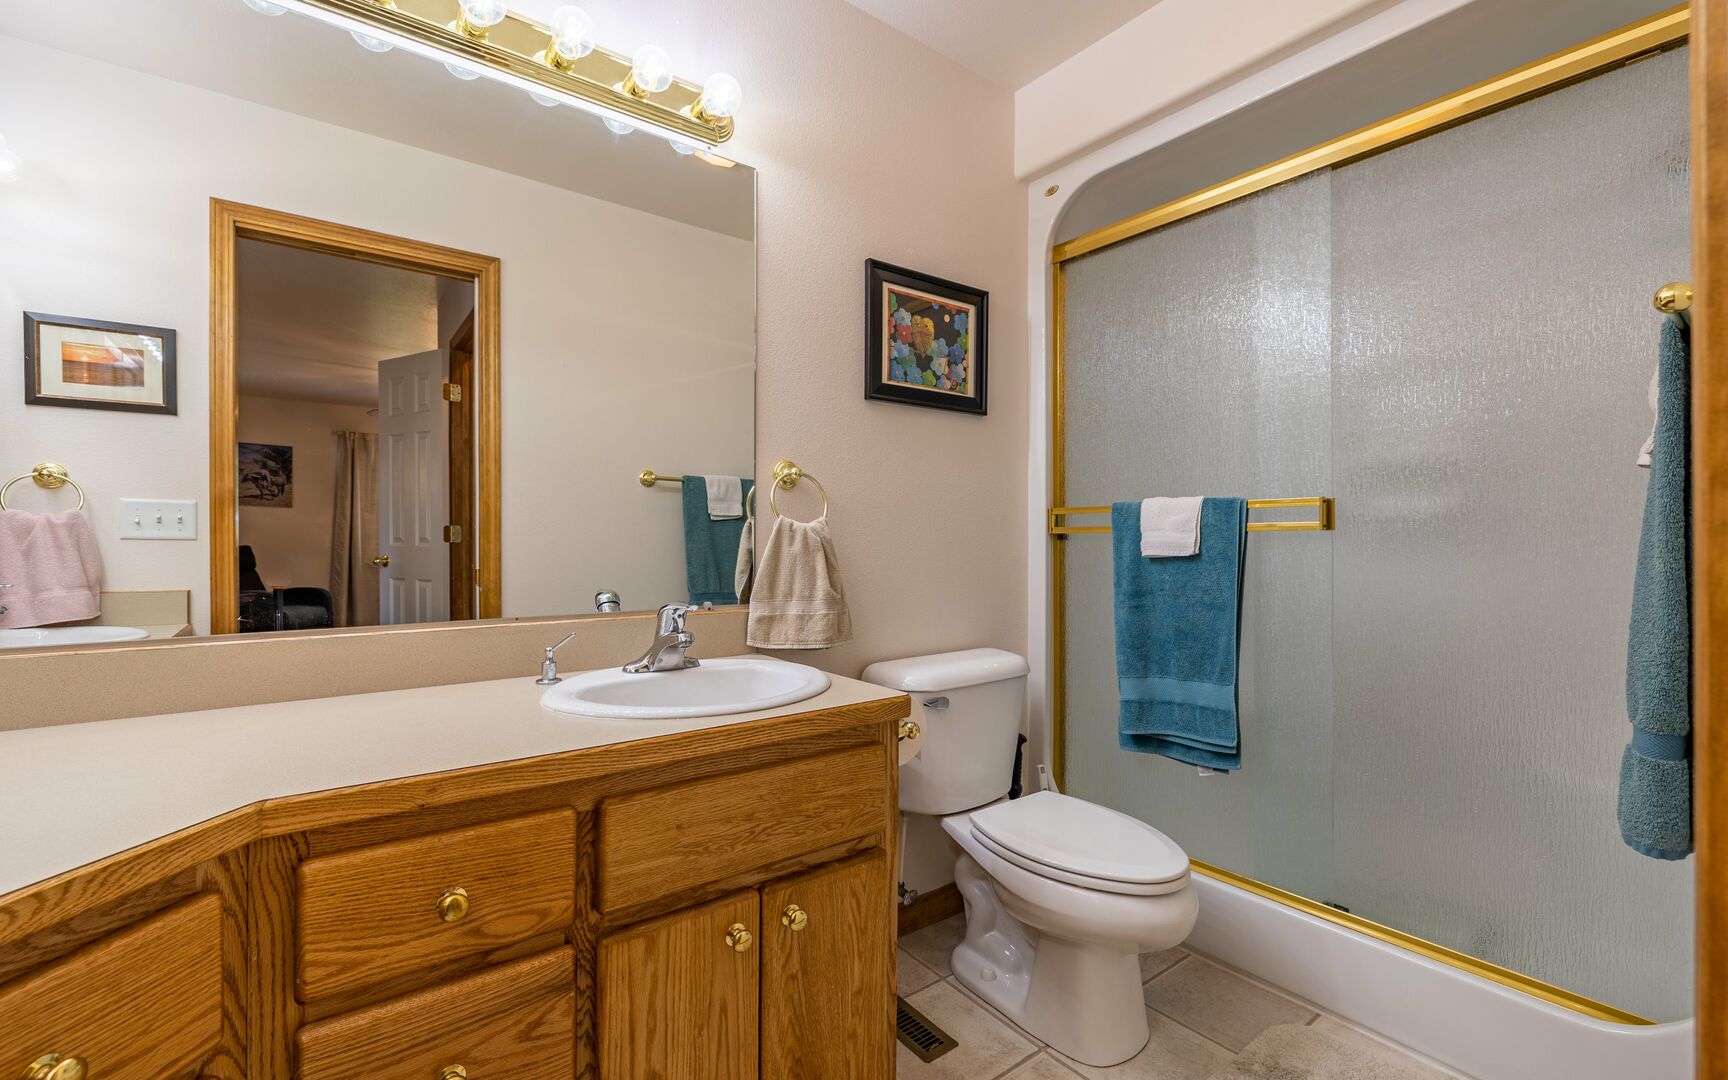 Large bathroom, attached to main bedroom.